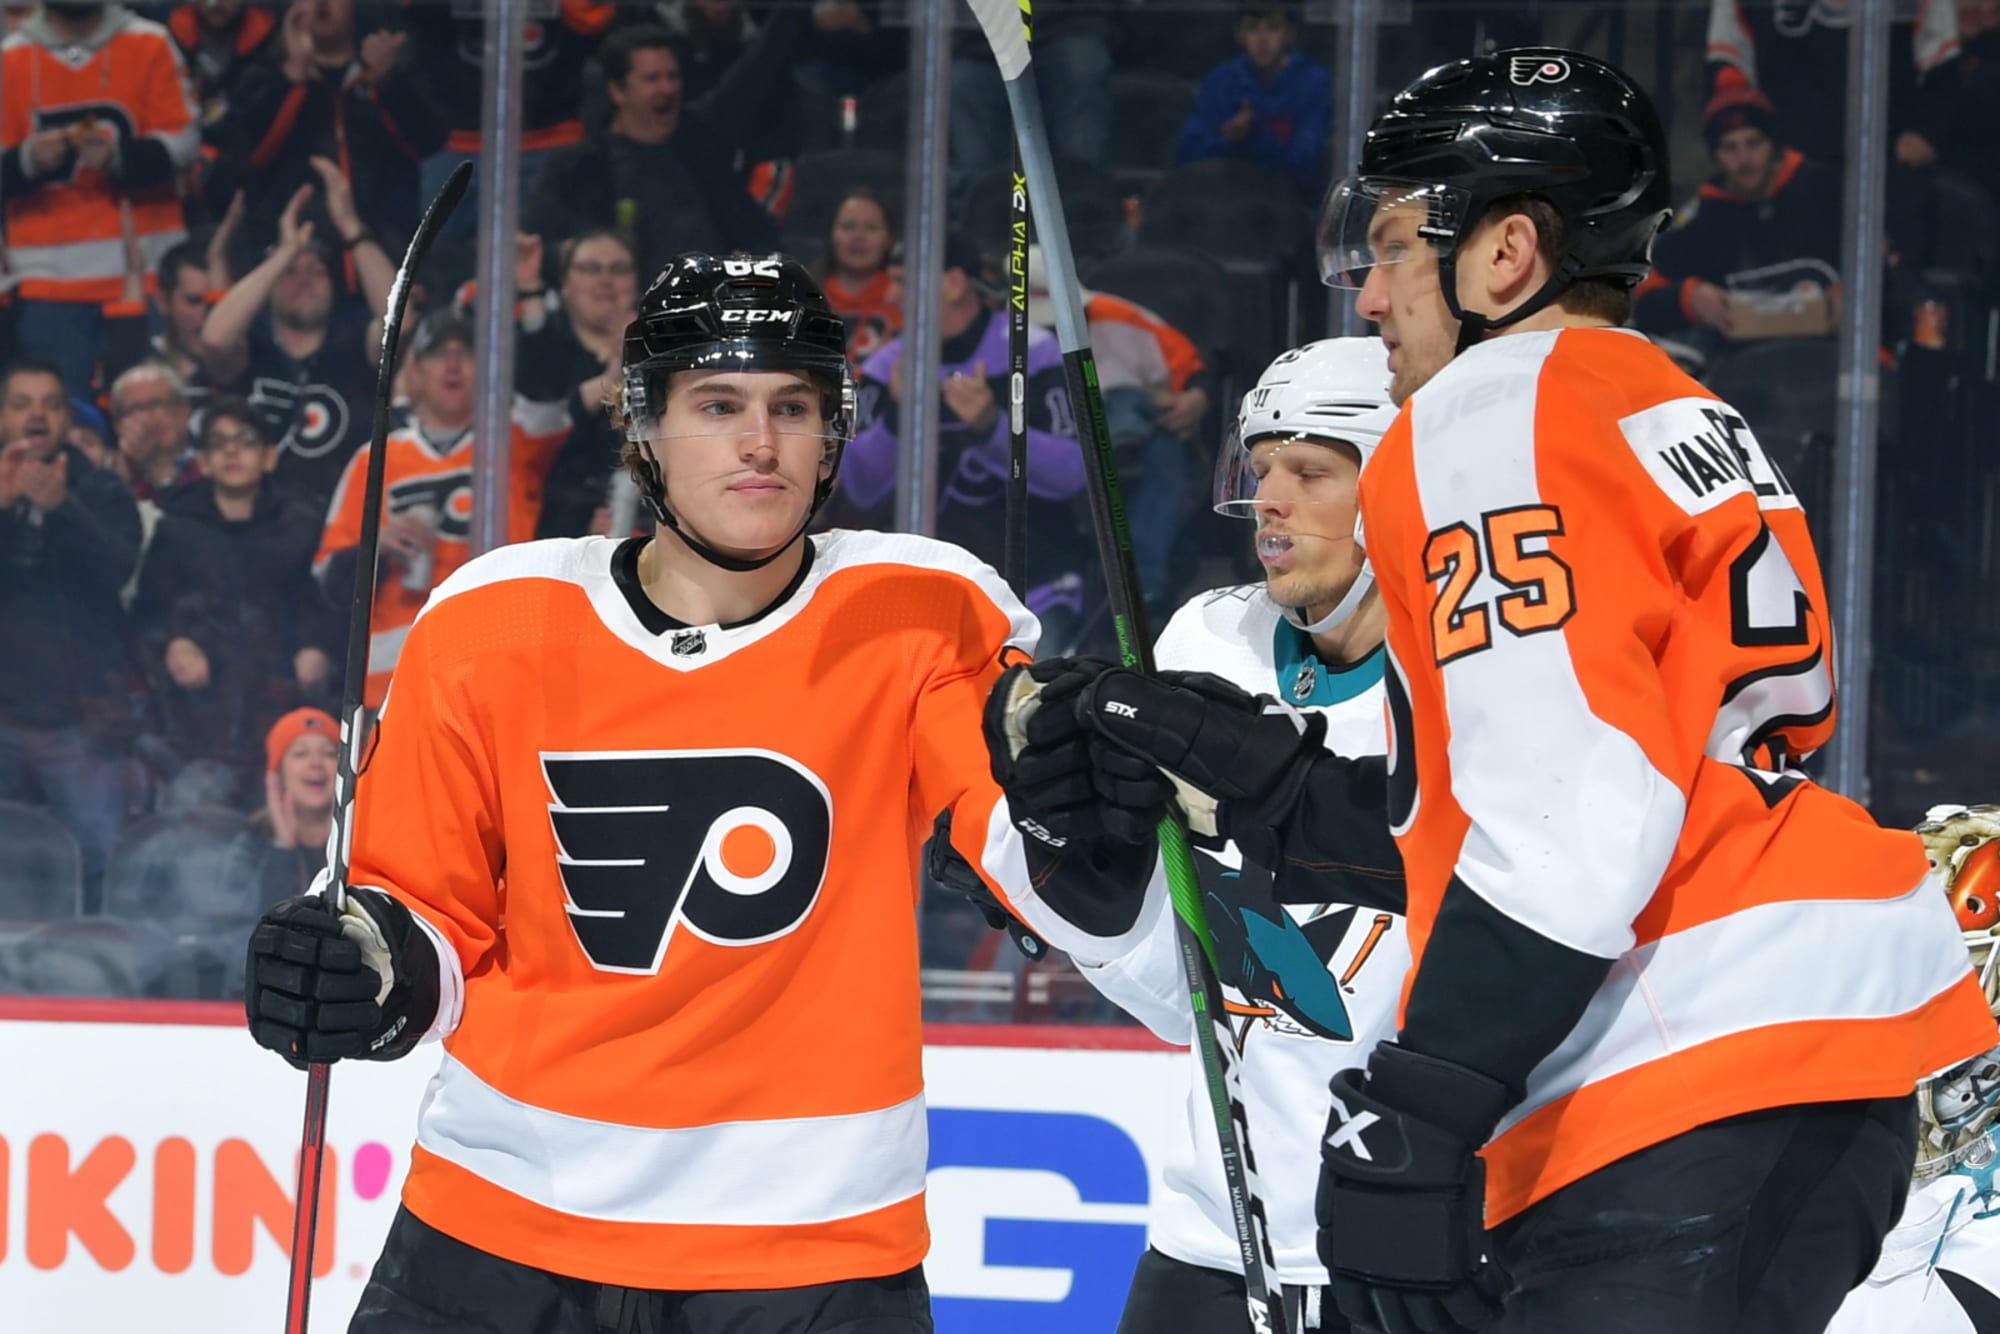 Flyers beat the Sharks 4-2